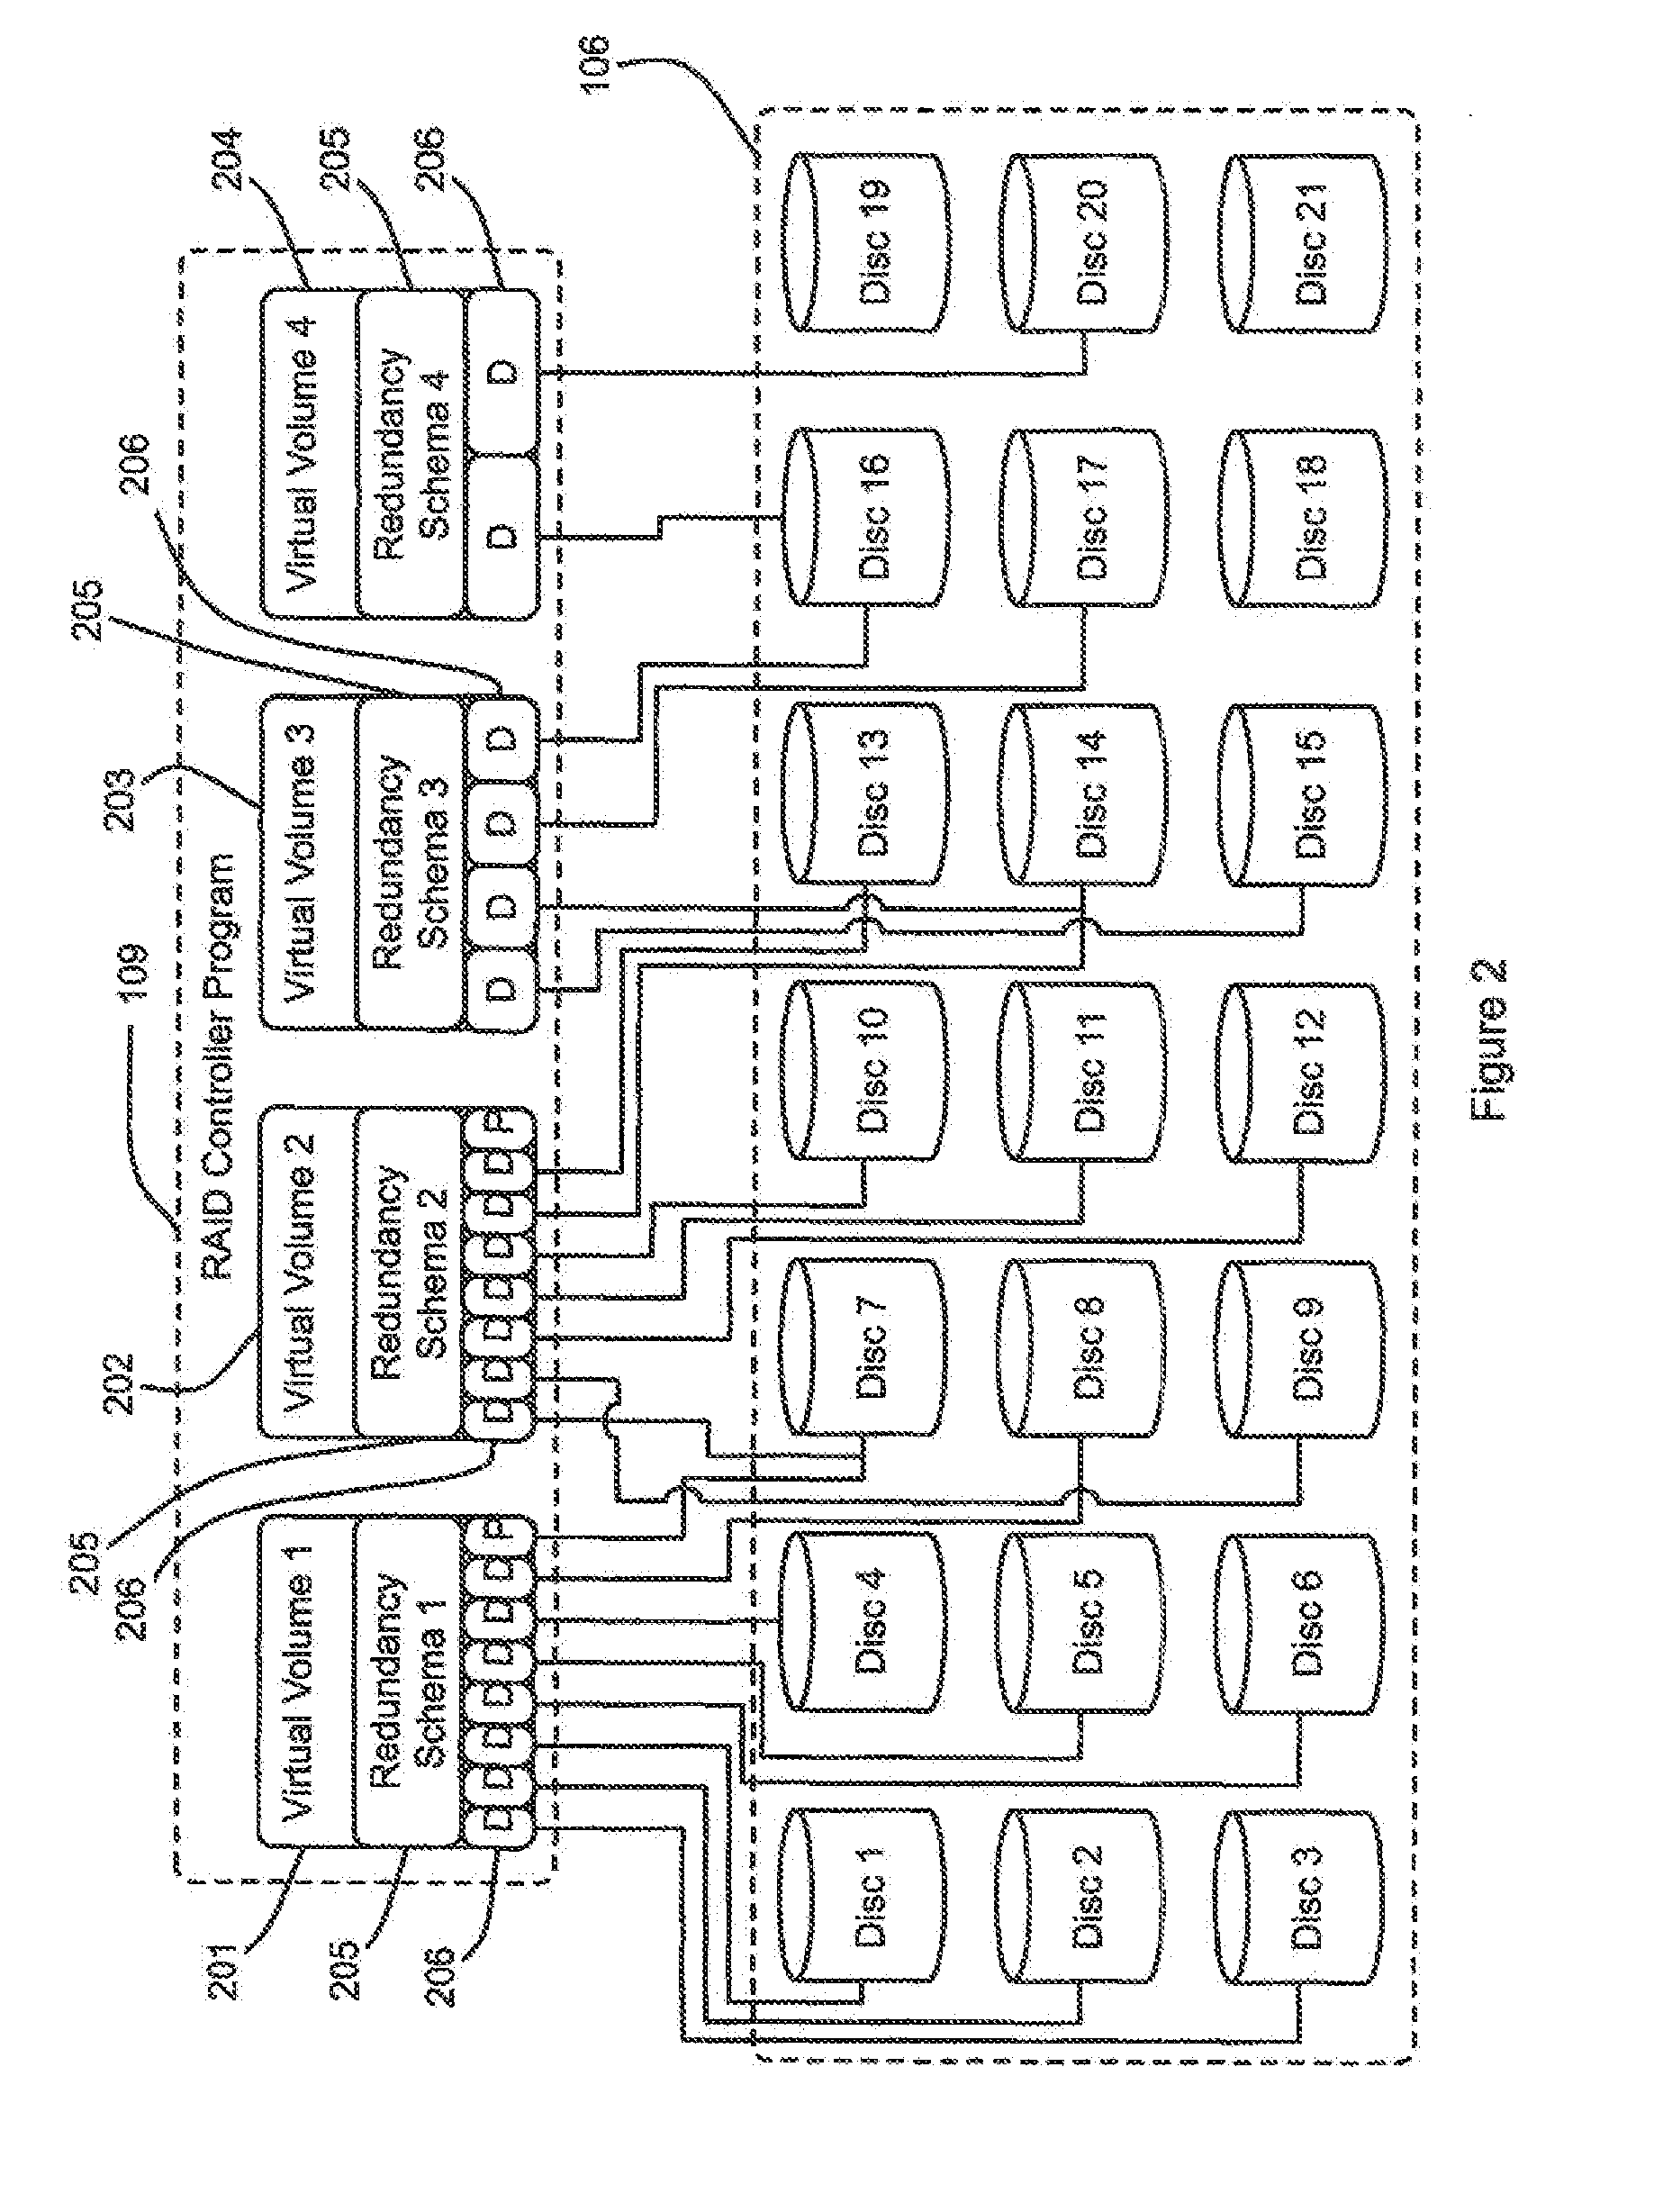 Providing redundancy in a virtualized storage system for a computer system